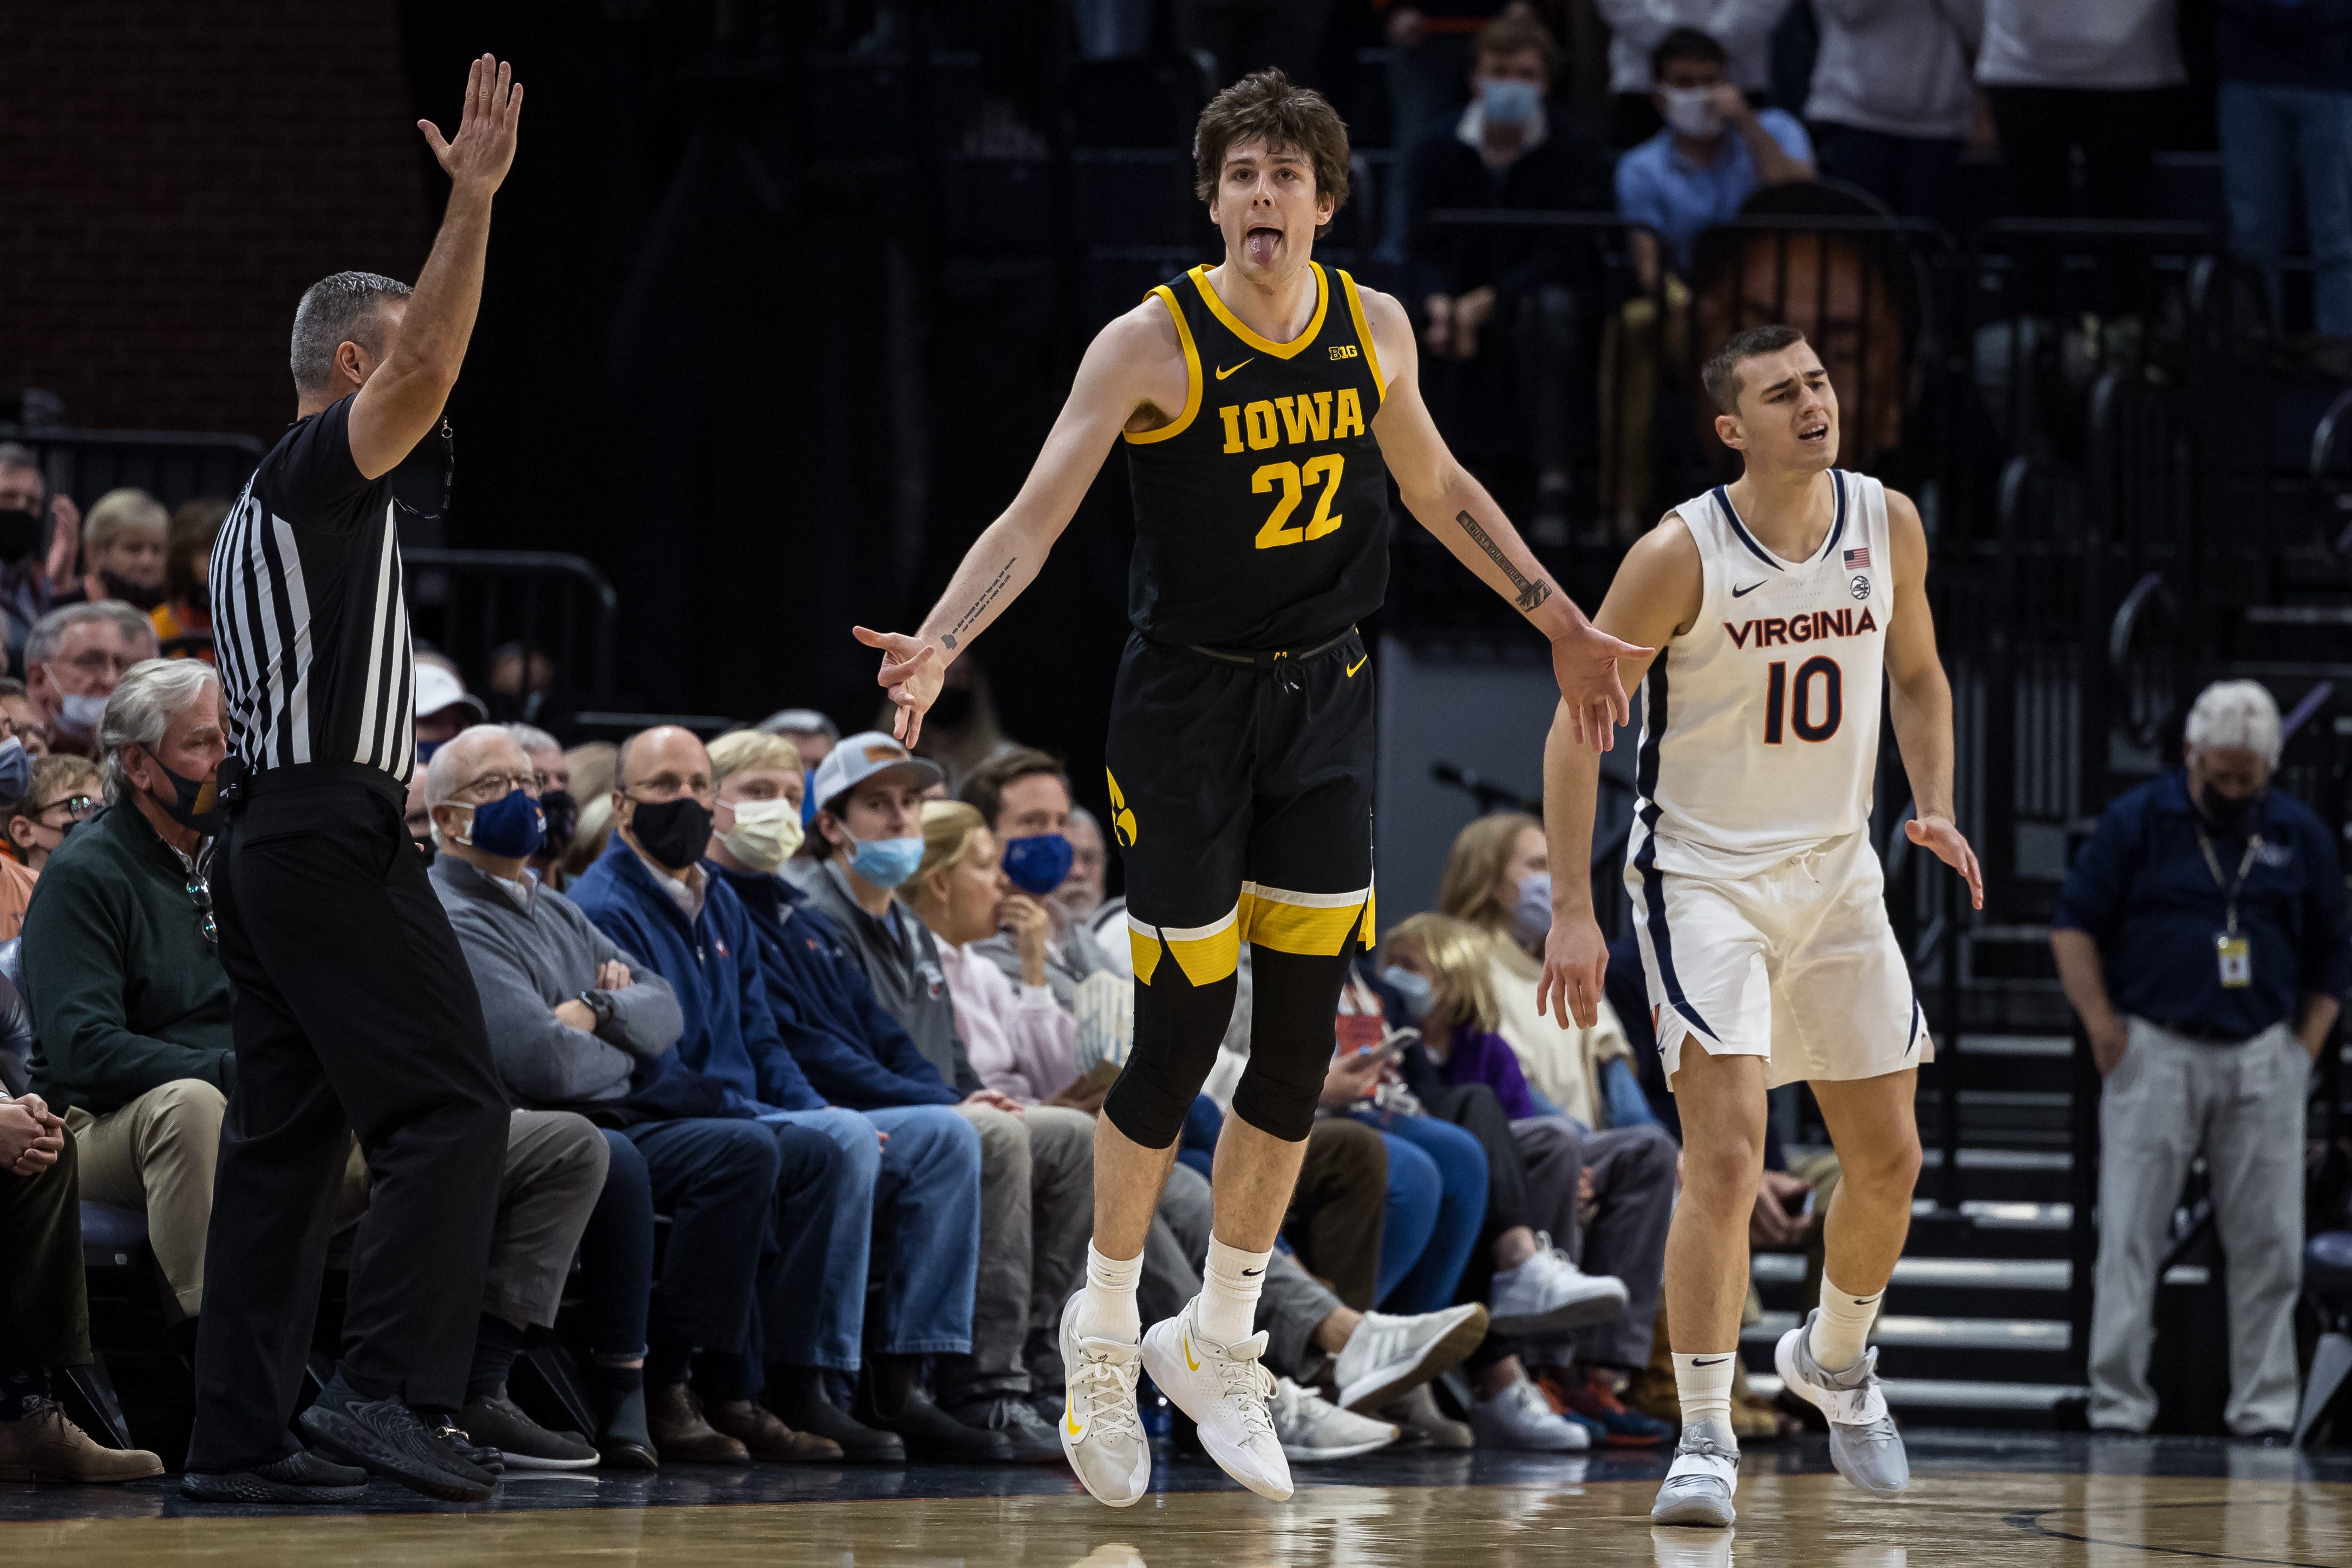 Iowa Hawkeyes forward Patrick McCaffery (22) reacts after making a three point basket in front of Virginia Cavaliers guard Taine Murray (10) during the second half, Monday, Nov. 29, 2021, at John Paul Jones Arena in Charlottesville, Va.